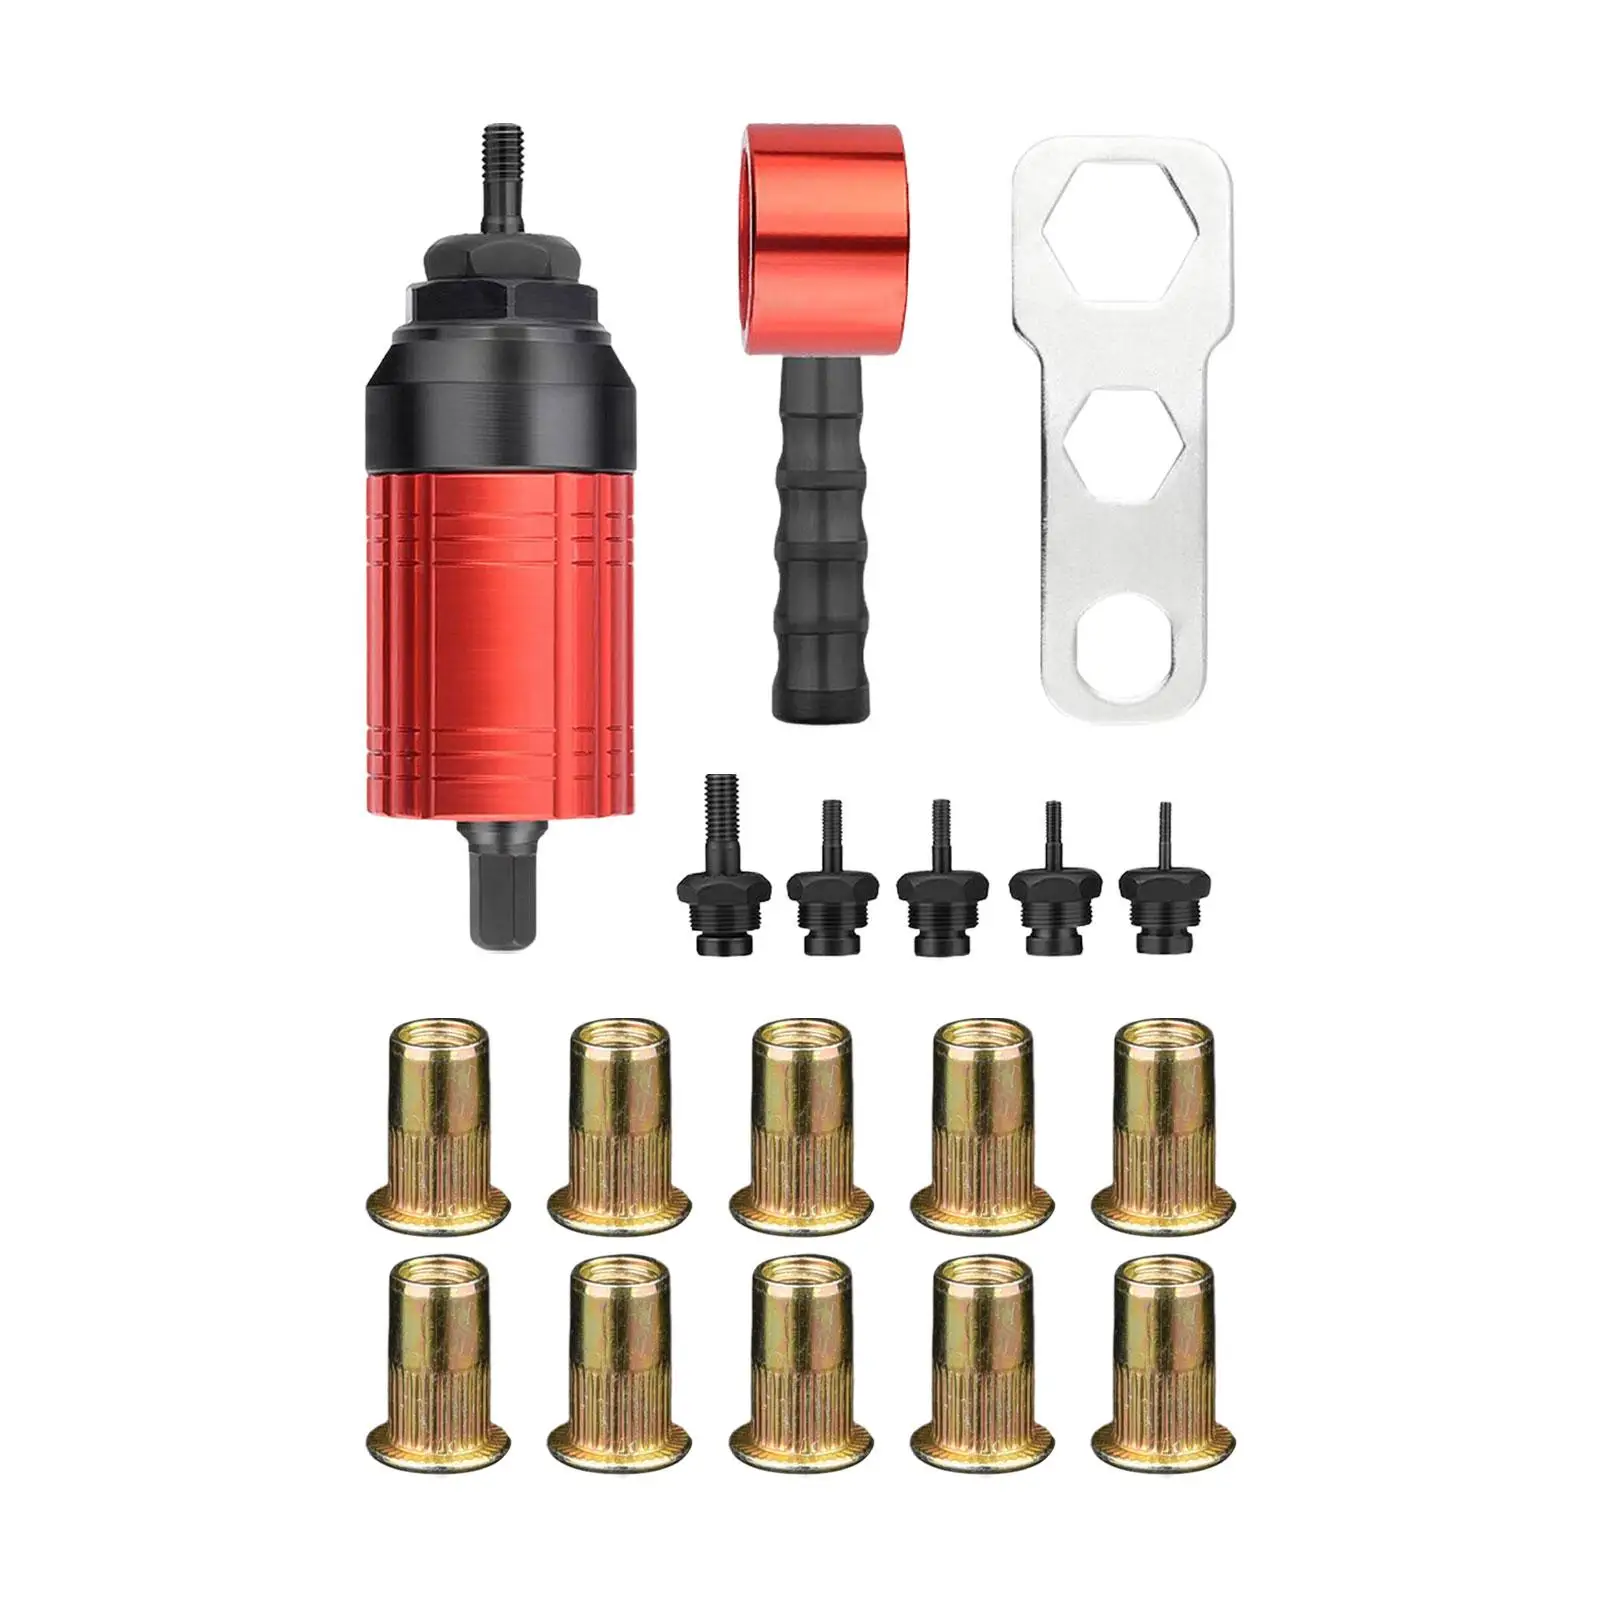 Rivet Nut Drill Adaptor Attachment Heavy Duty Professional Riveting Tools for Ship Furniture Architecture Electrical Appliance